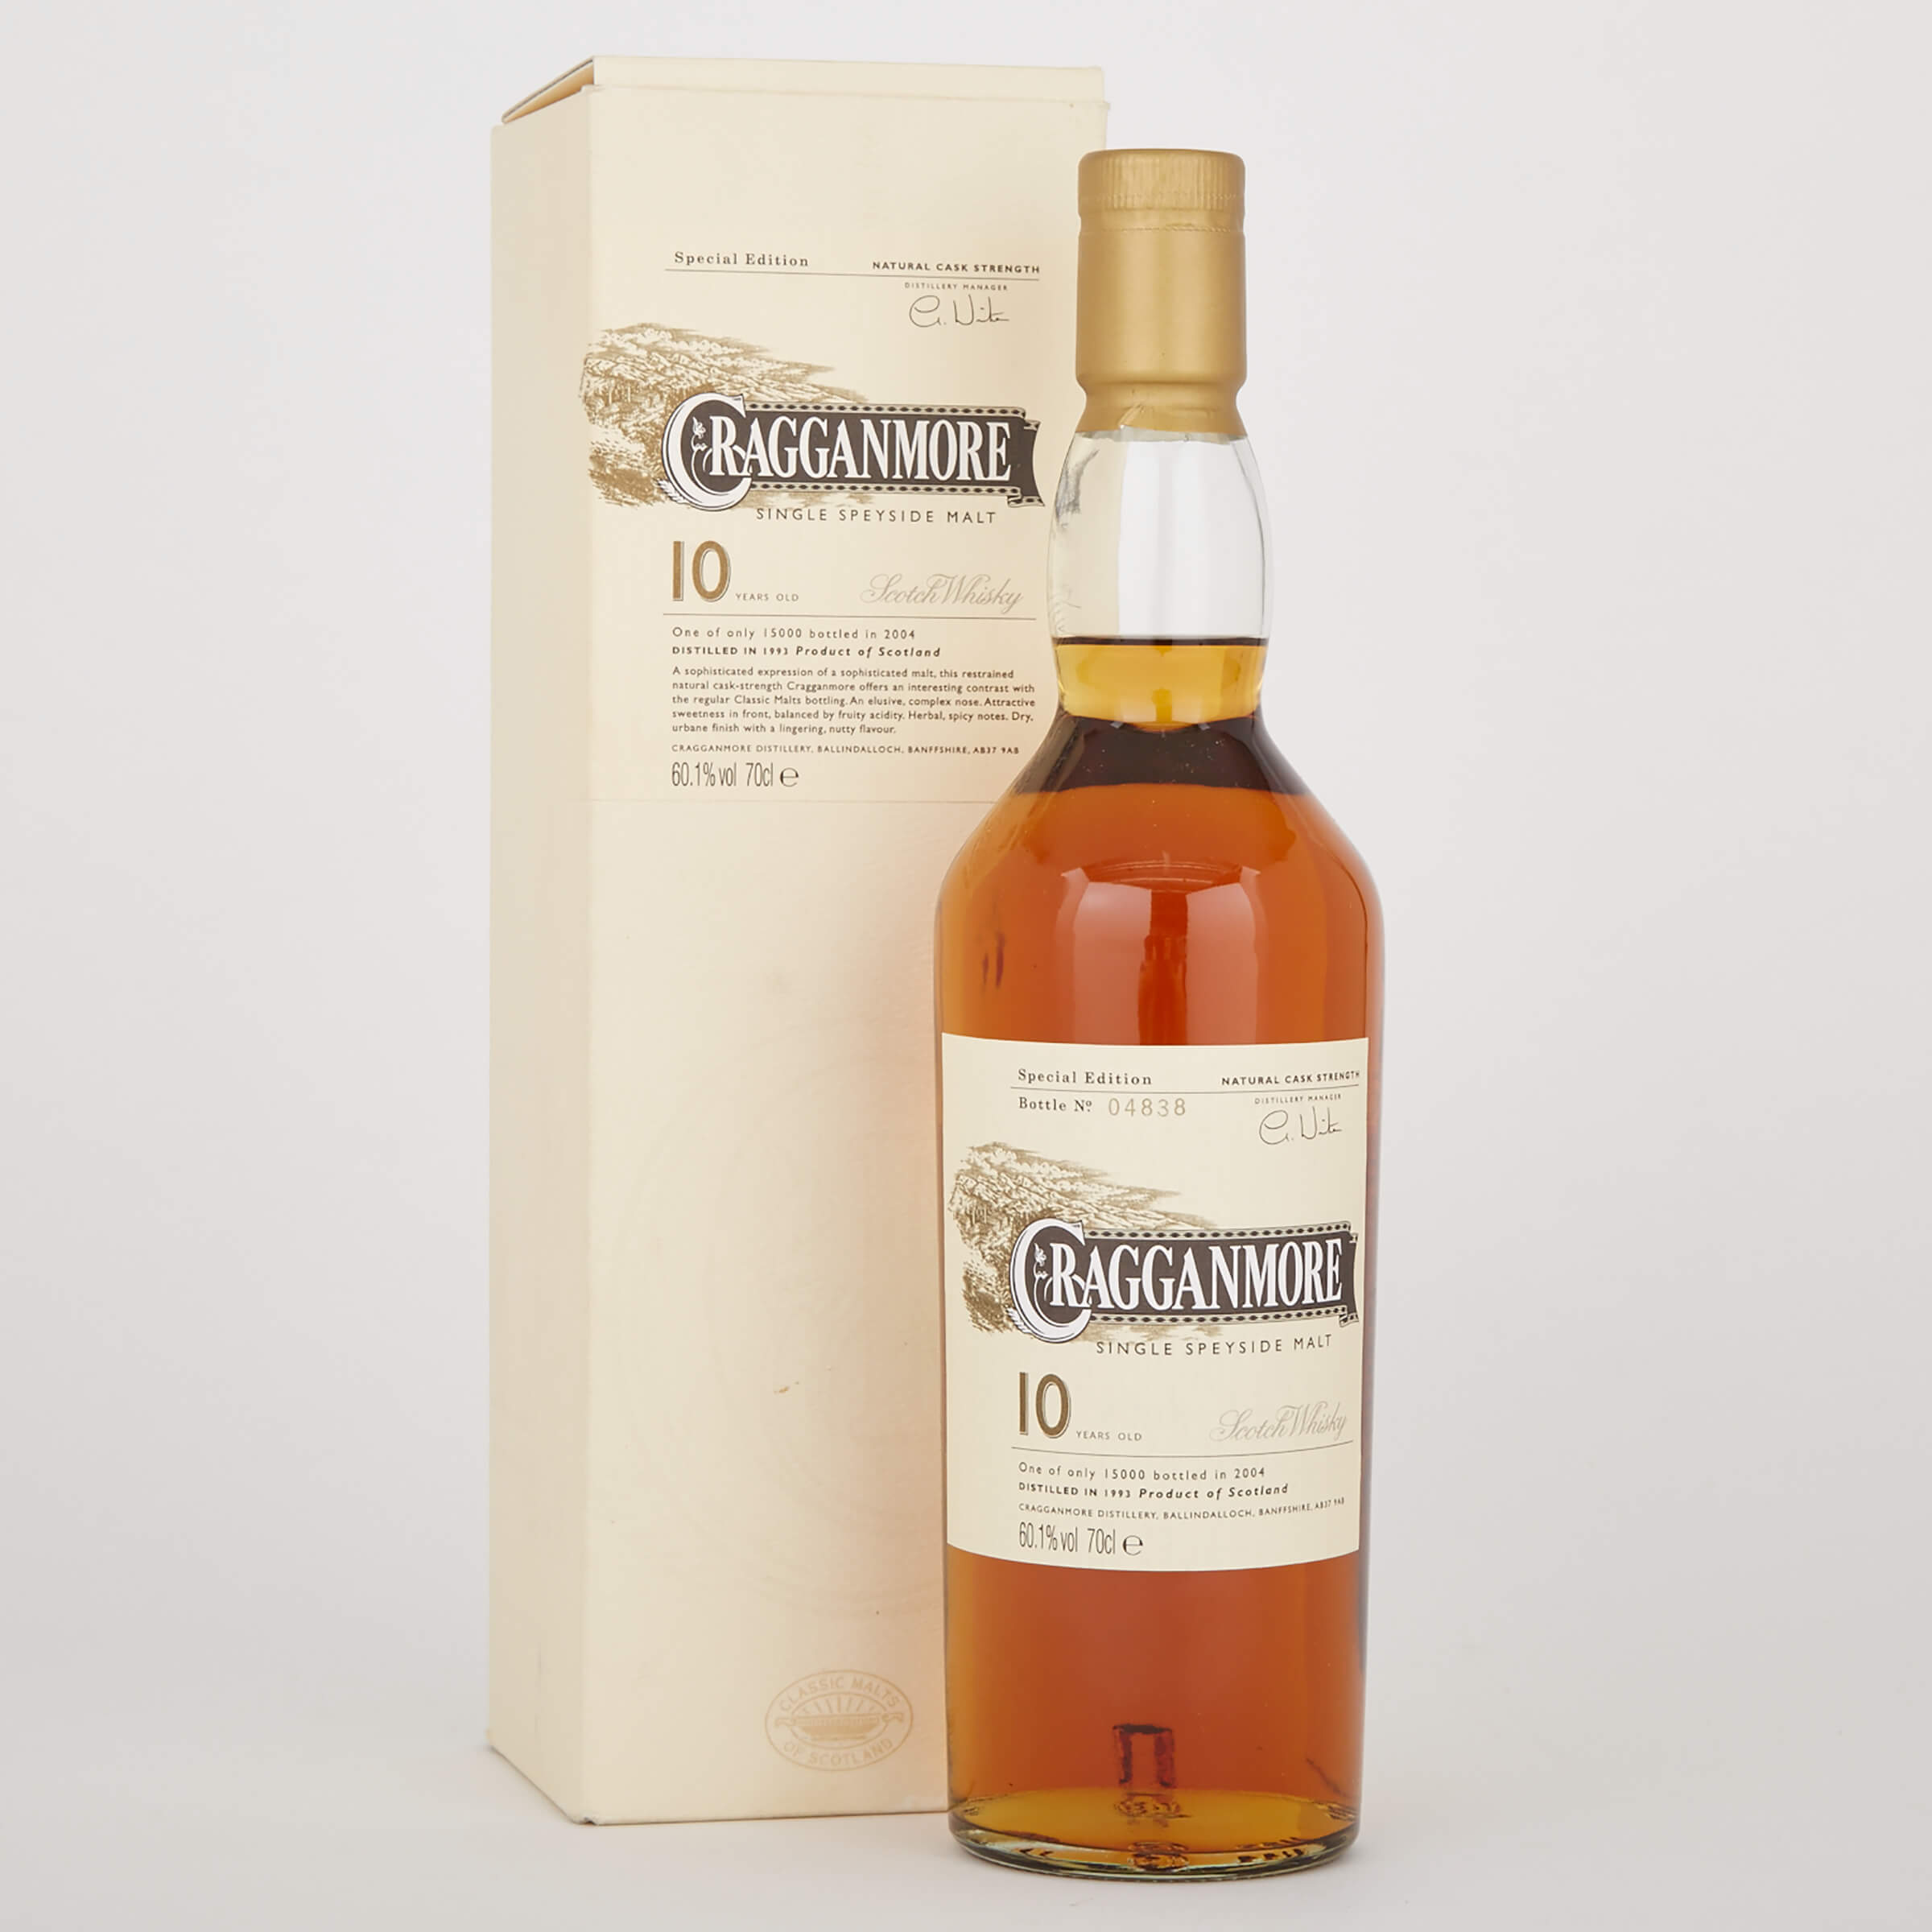 CRAGGANMORE SINGLE SPEYSIDE MALT WHISKY 10 YEARS (ONE 70 CL)